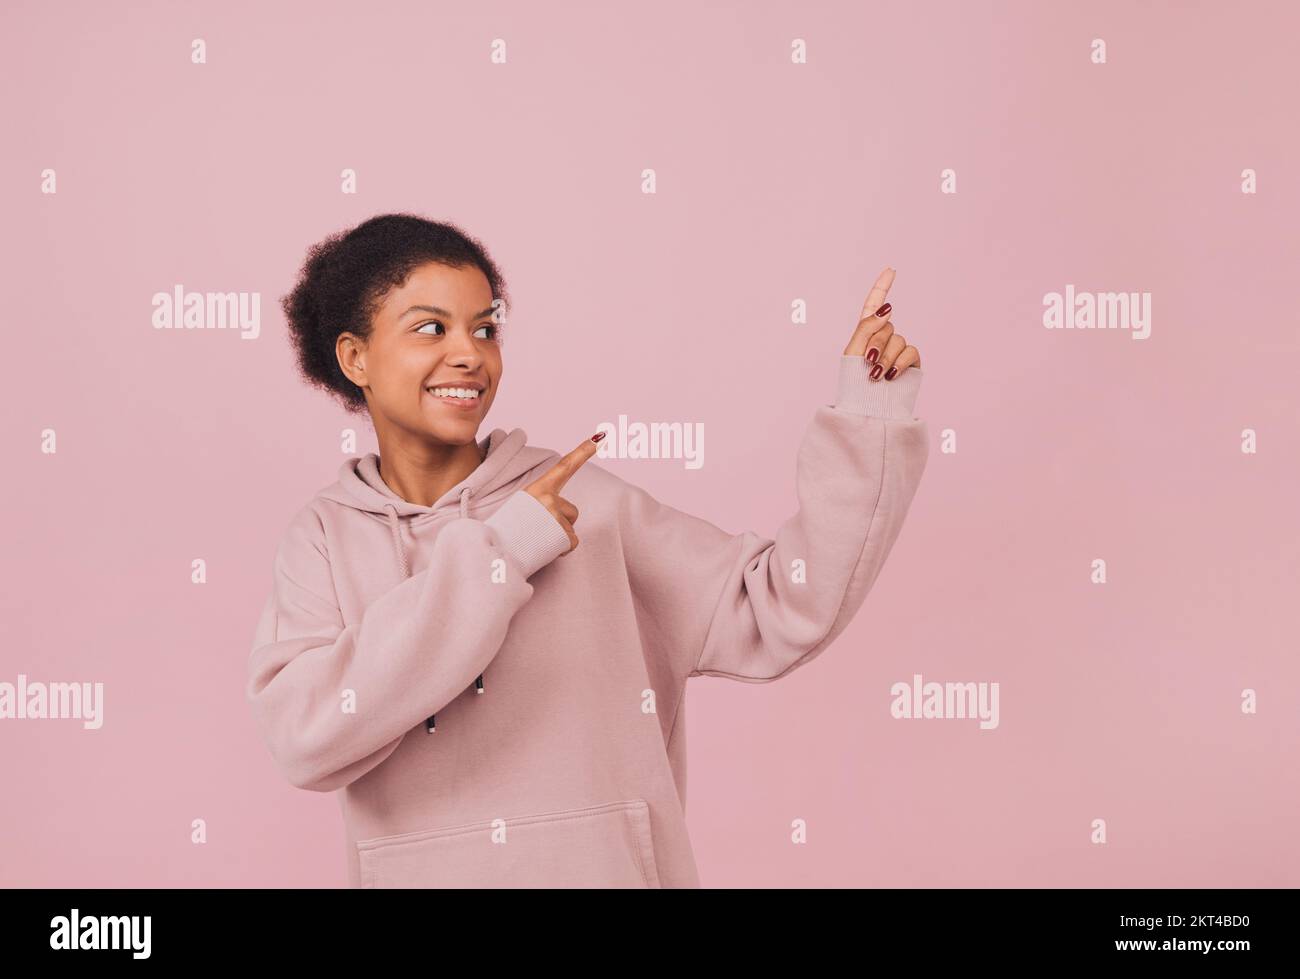 Smiling girl with pointing gesture. Advertising concept. Portrait of happy black woman in pink hoodie against pink background Stock Photo